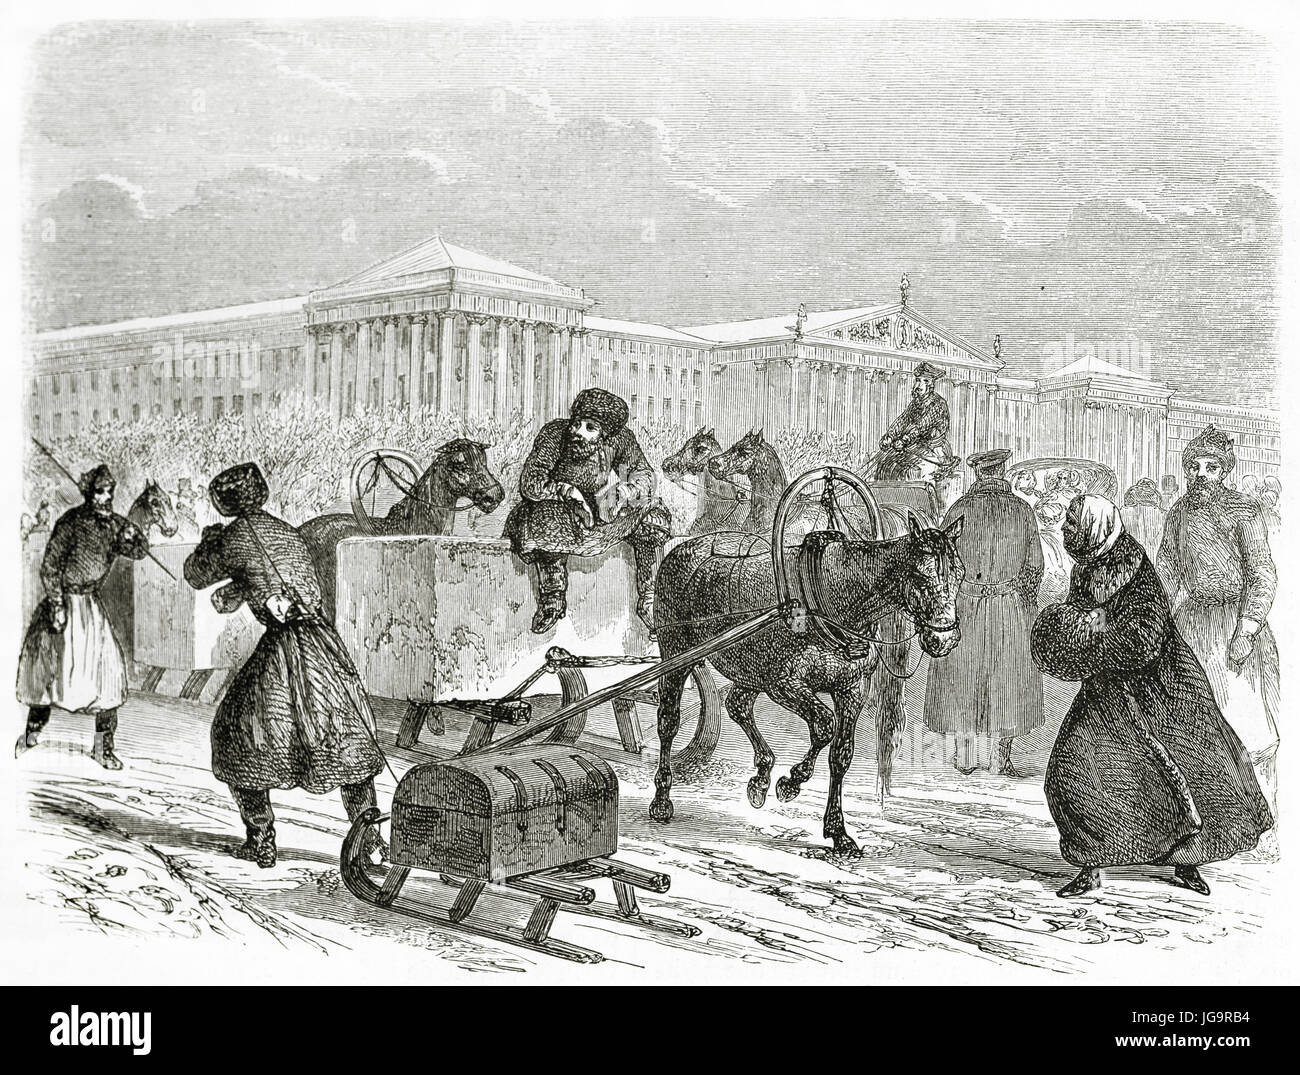 Old illustration of men carrying ice on a sleigh in Saint Petersburg, Russia. Created by Blanchard, published on Le Tour du Monde, Paris, 1861 Stock Photo